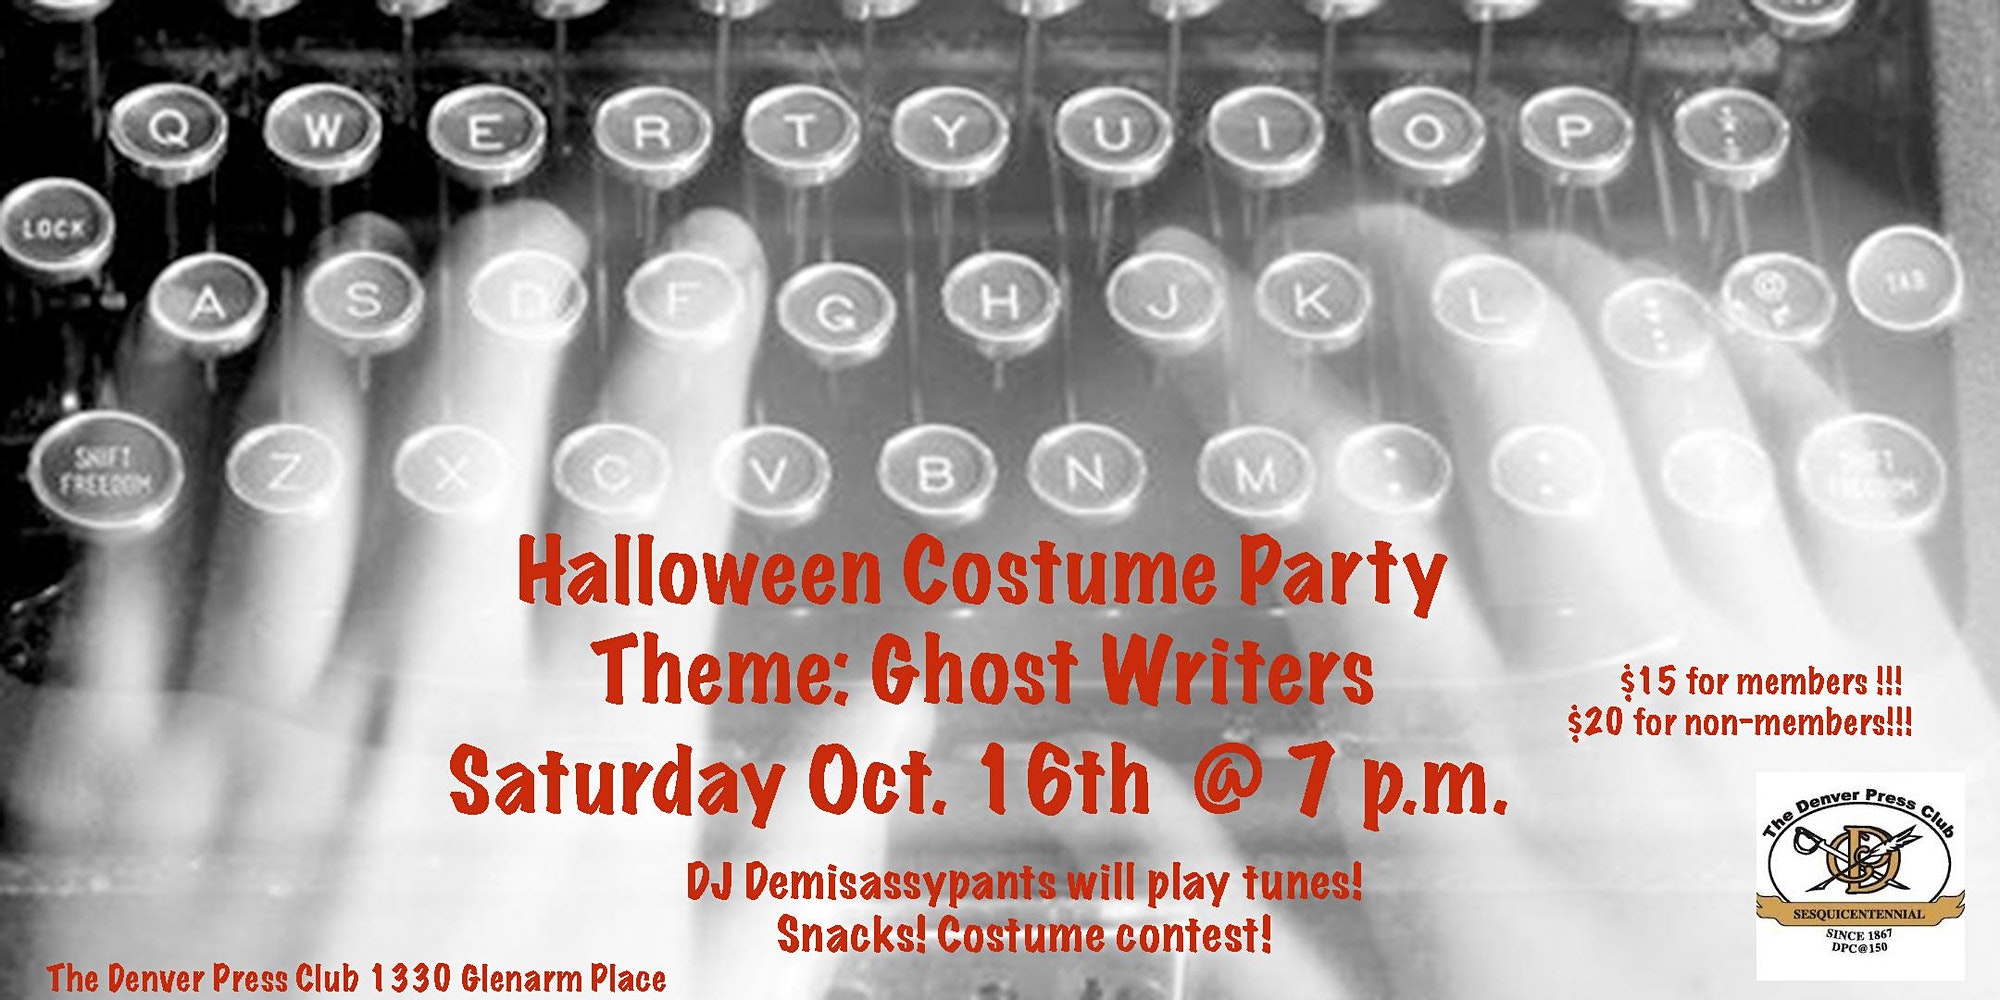 Halloween “Ghost Writers” Costume Party – Denver Press Club